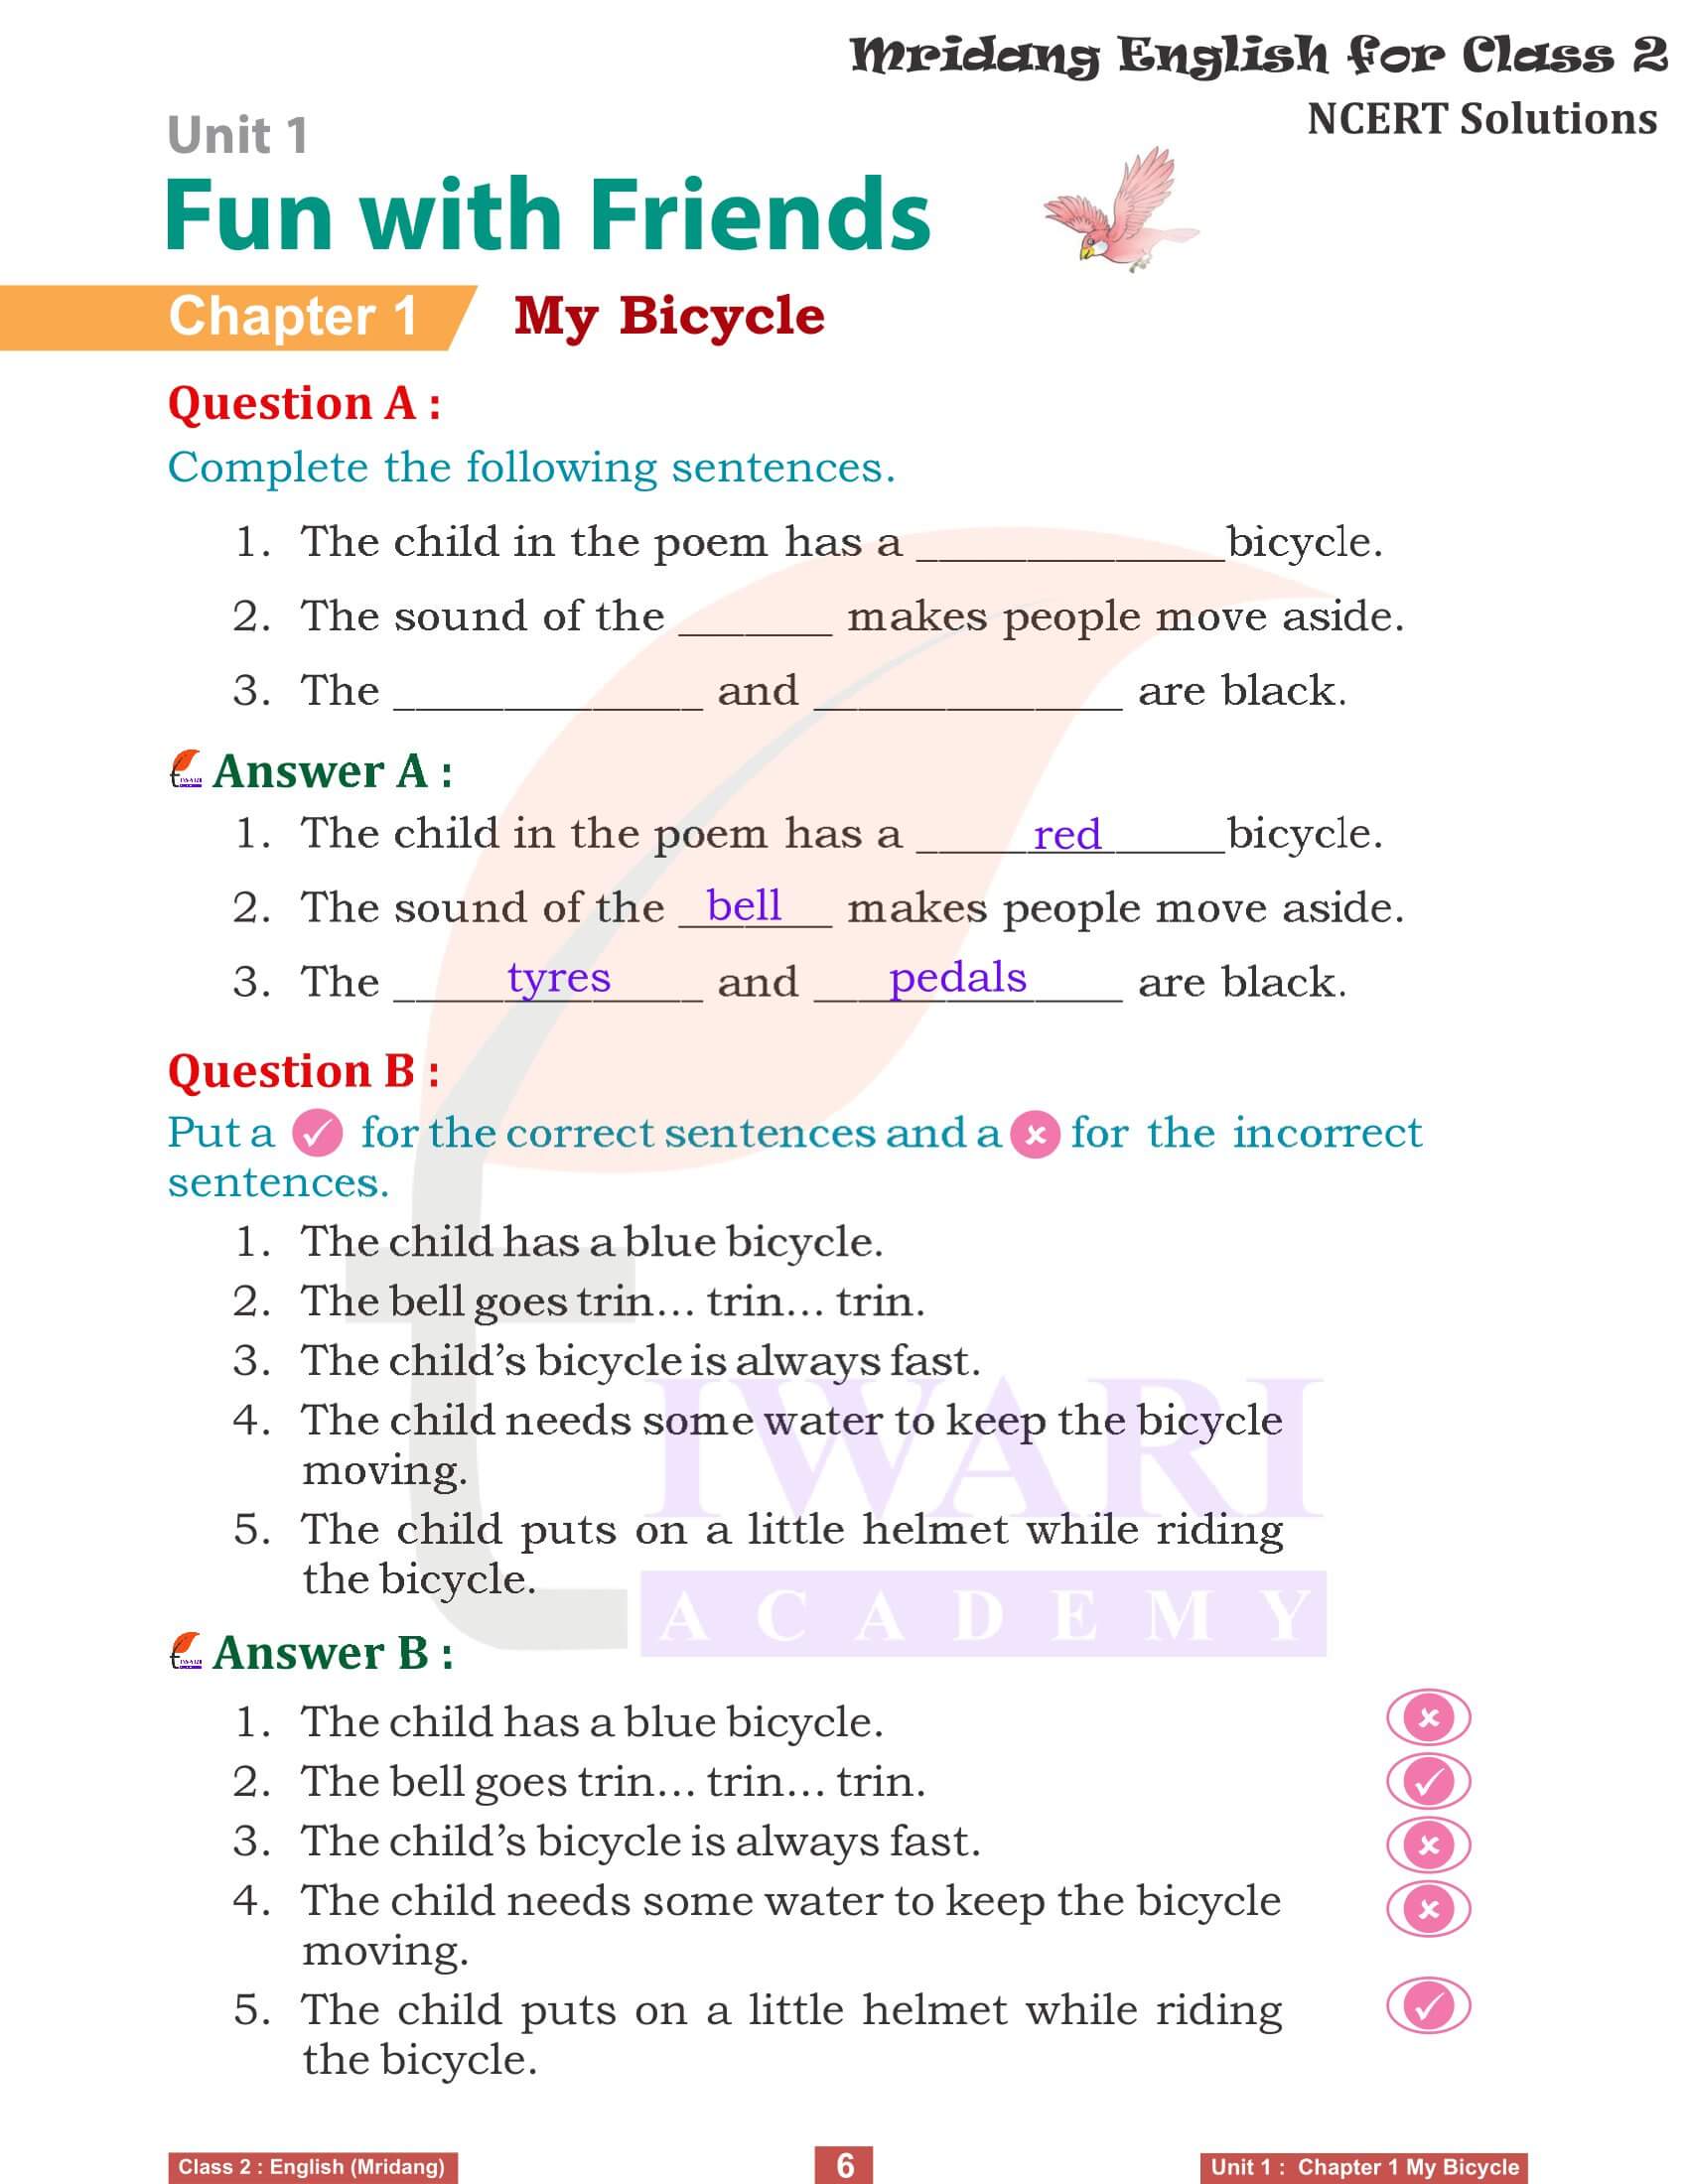 NCERT Solutions for class 2 English Mridang unit 1 Fun with Friends Chapter 1 My Bicycle Exercises